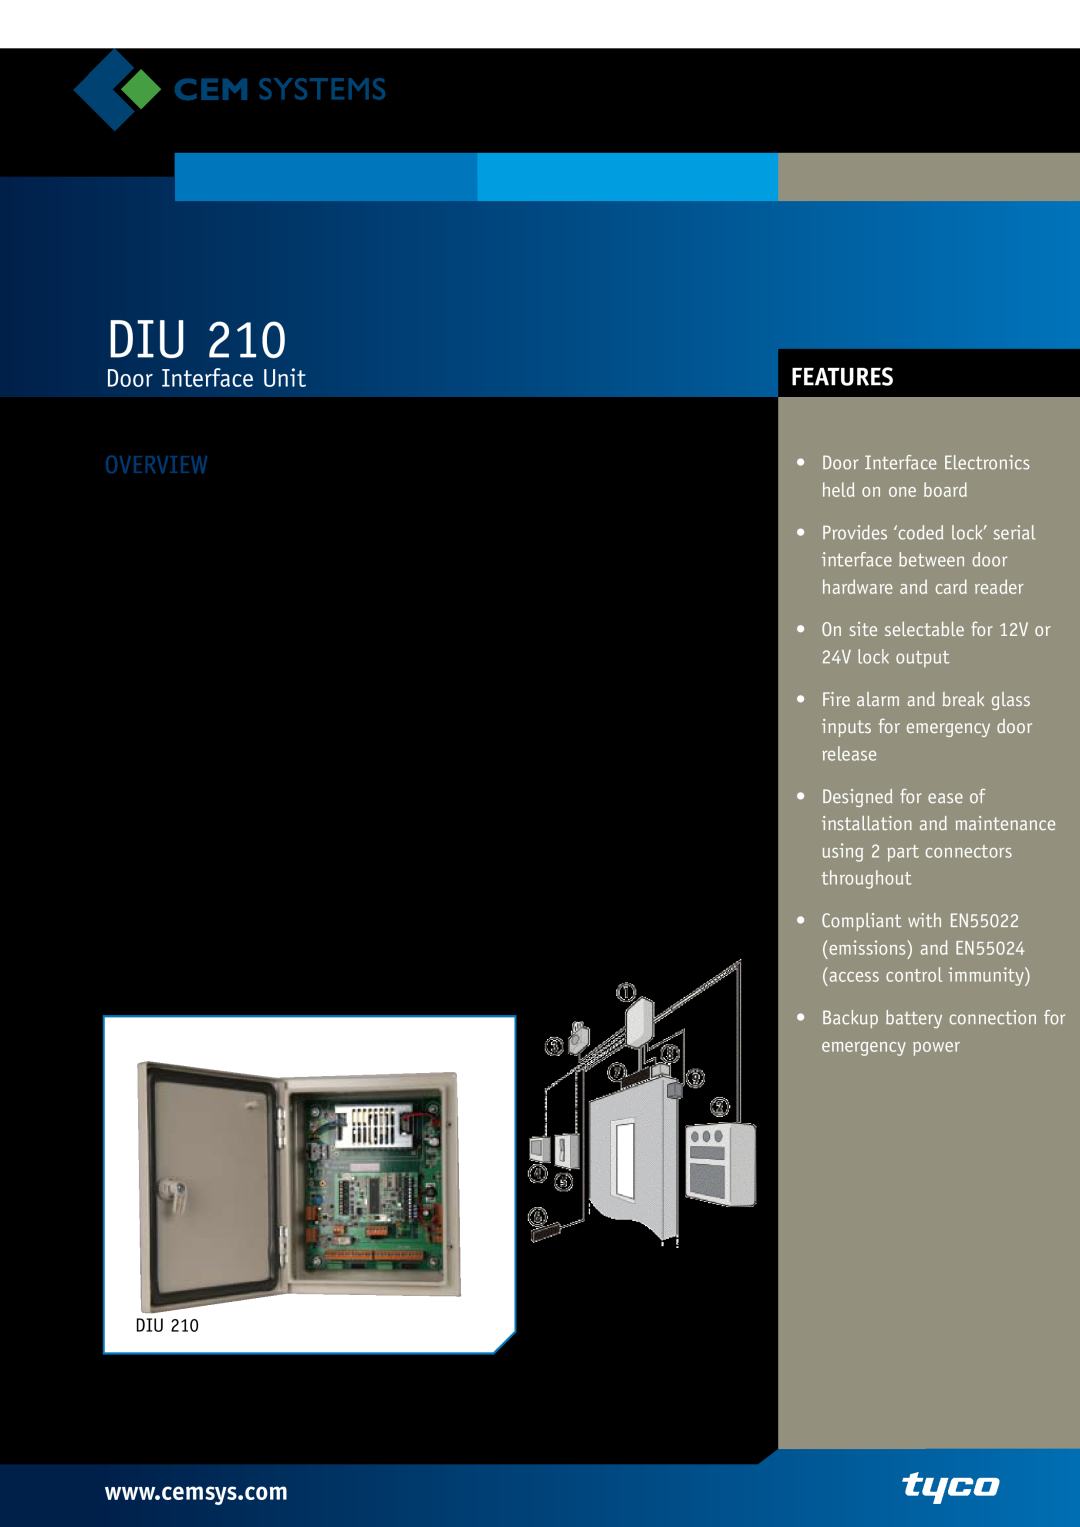 Tyco DIU 210 manual Door Interface Unit, Overview, Features, On site selectable for 12V or 24V lock output 